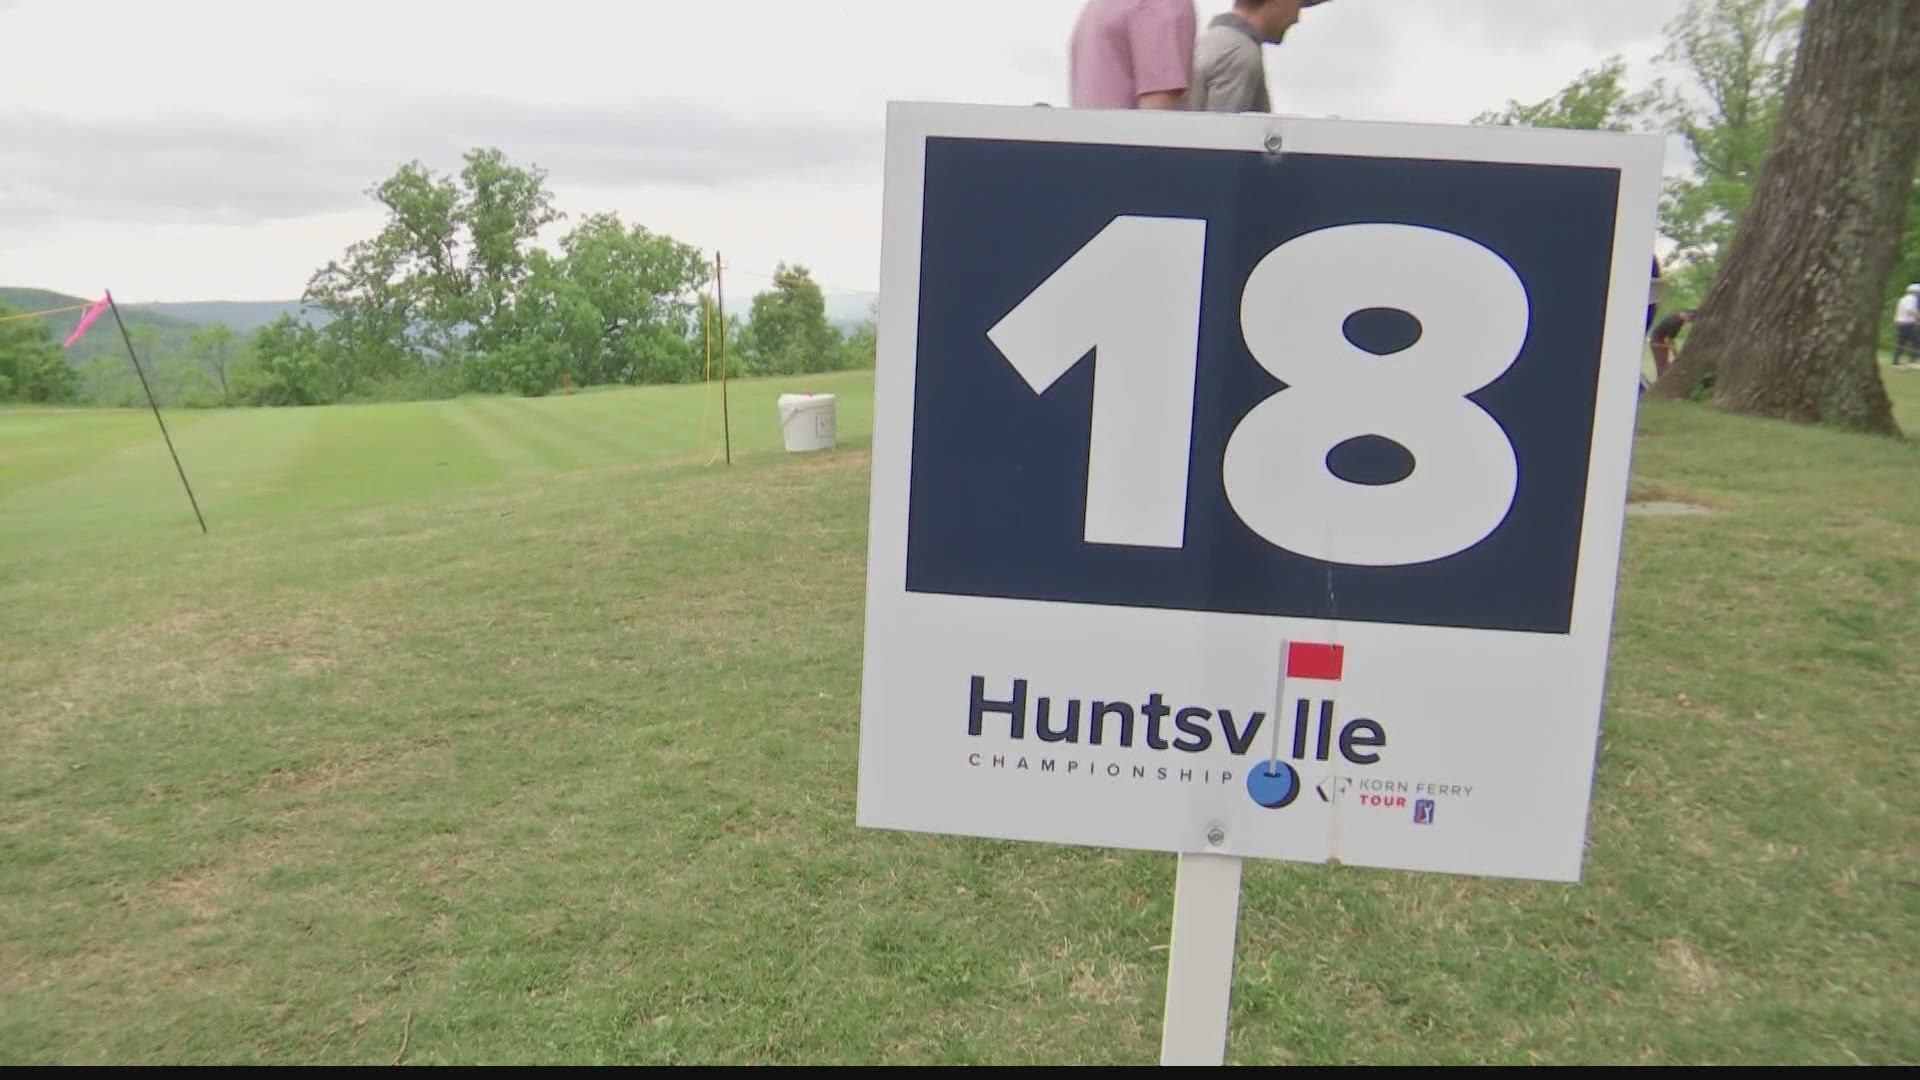 The Inaugural Huntsville Championship began on Thursday at The Ledges. Kayla Carlile provided a recap from the first day on the green.